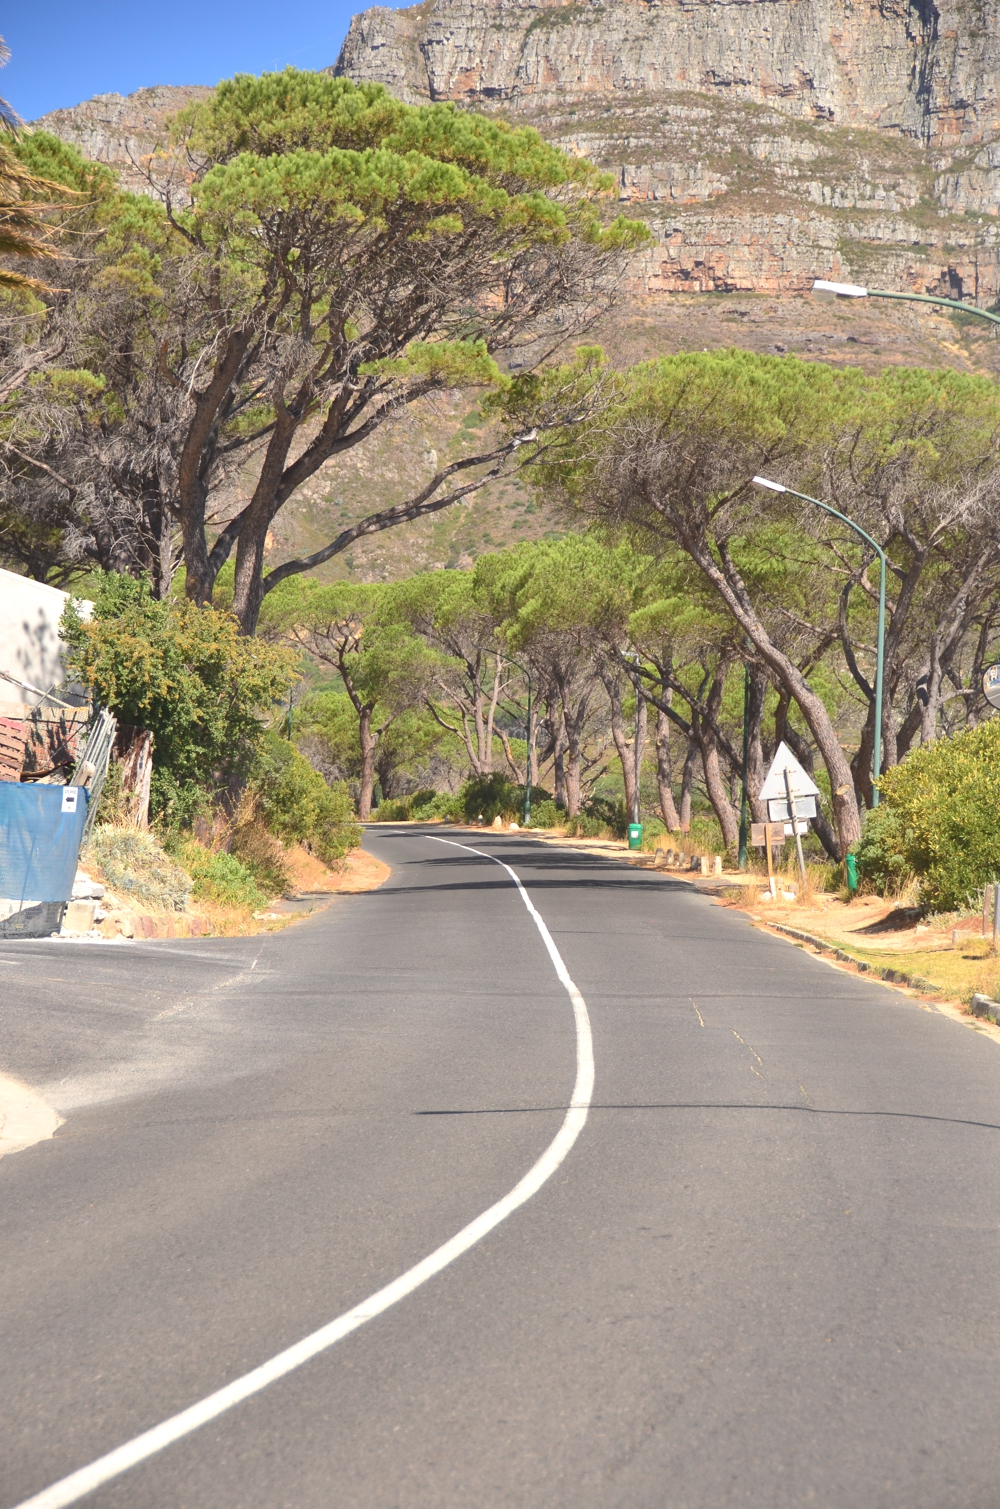 The steep road out of Camps Bay, toward Gardens